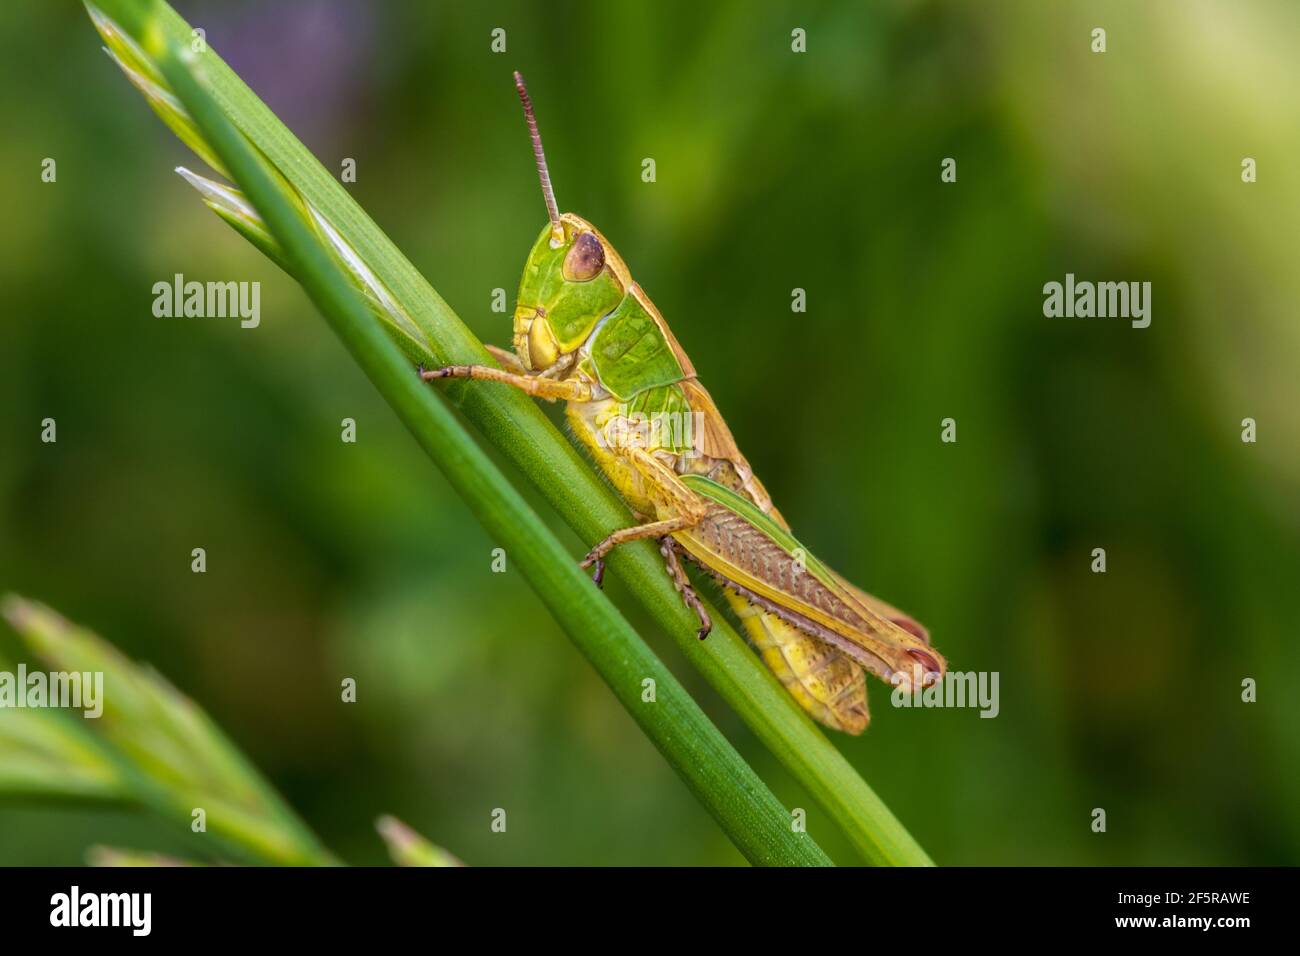 close-up of grasshopper on a plant part with green color in the background Stock Photo